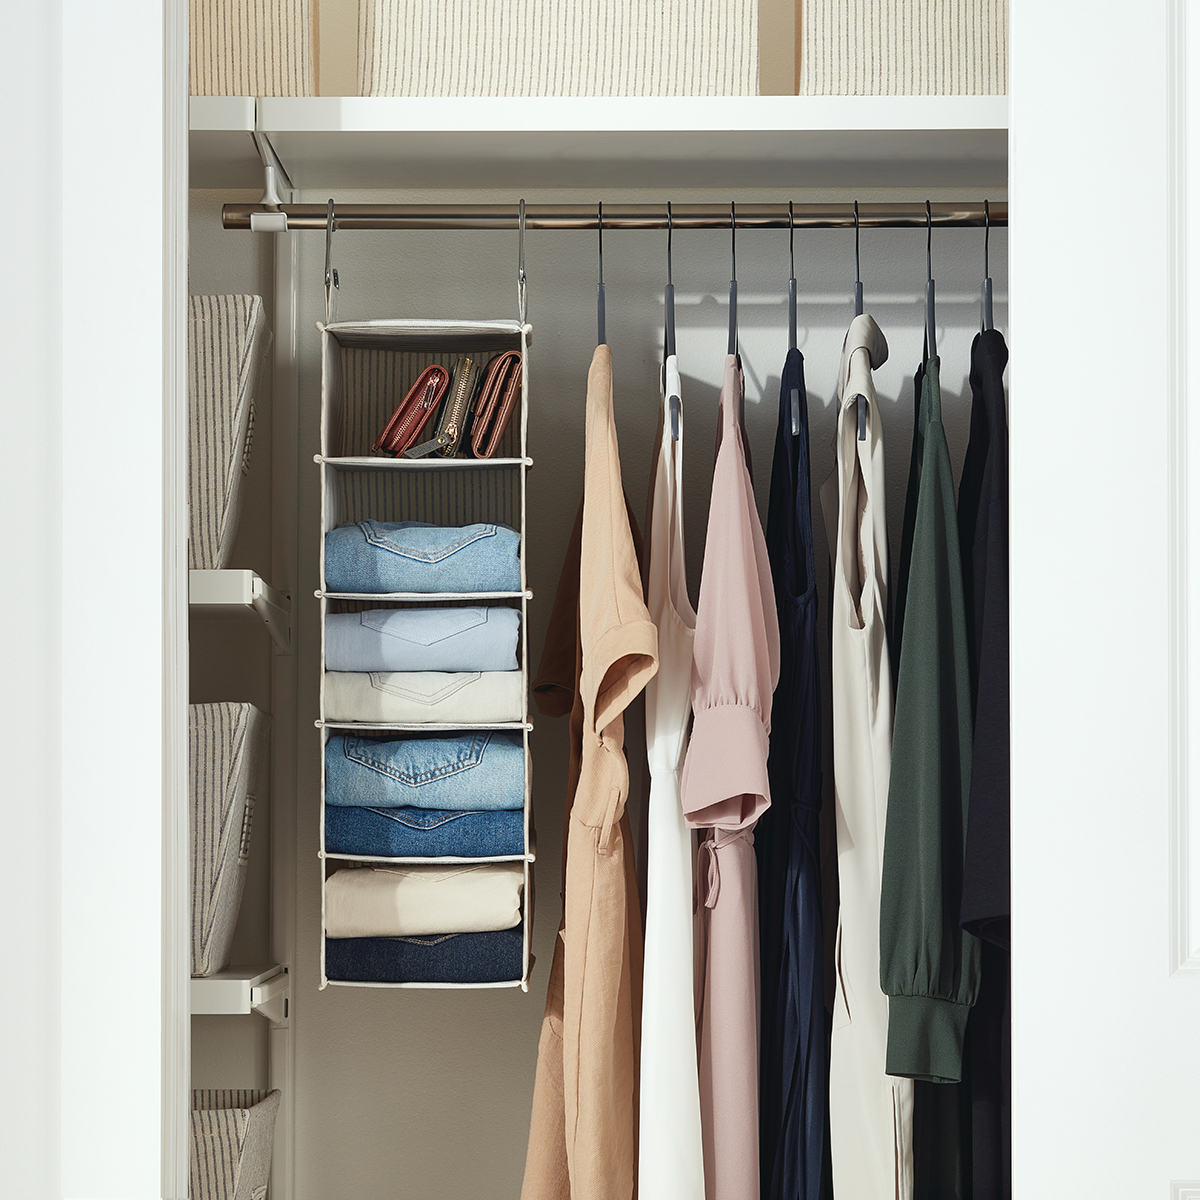 https://www.containerstore.com/catalogimages/477294/10091534-5-compartment-hanging-close.jpg